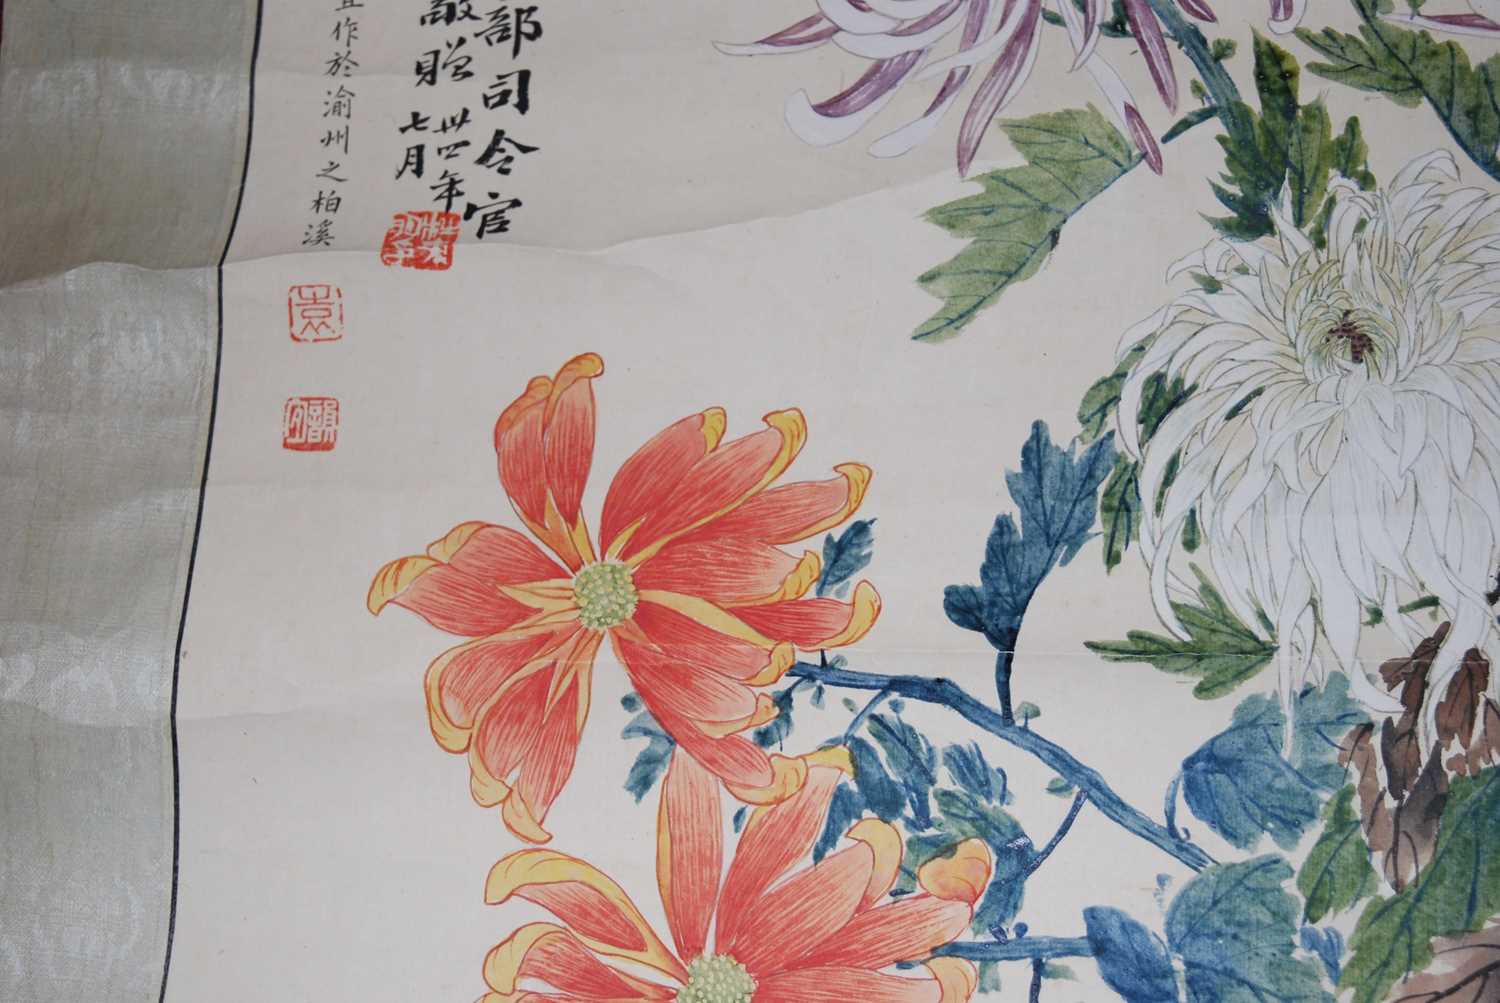 Yuan Yunyi (袁韻宜) (1920-2004) - Chrysanthemums, Republic of China scroll painting dated 1944, ink - Image 26 of 31